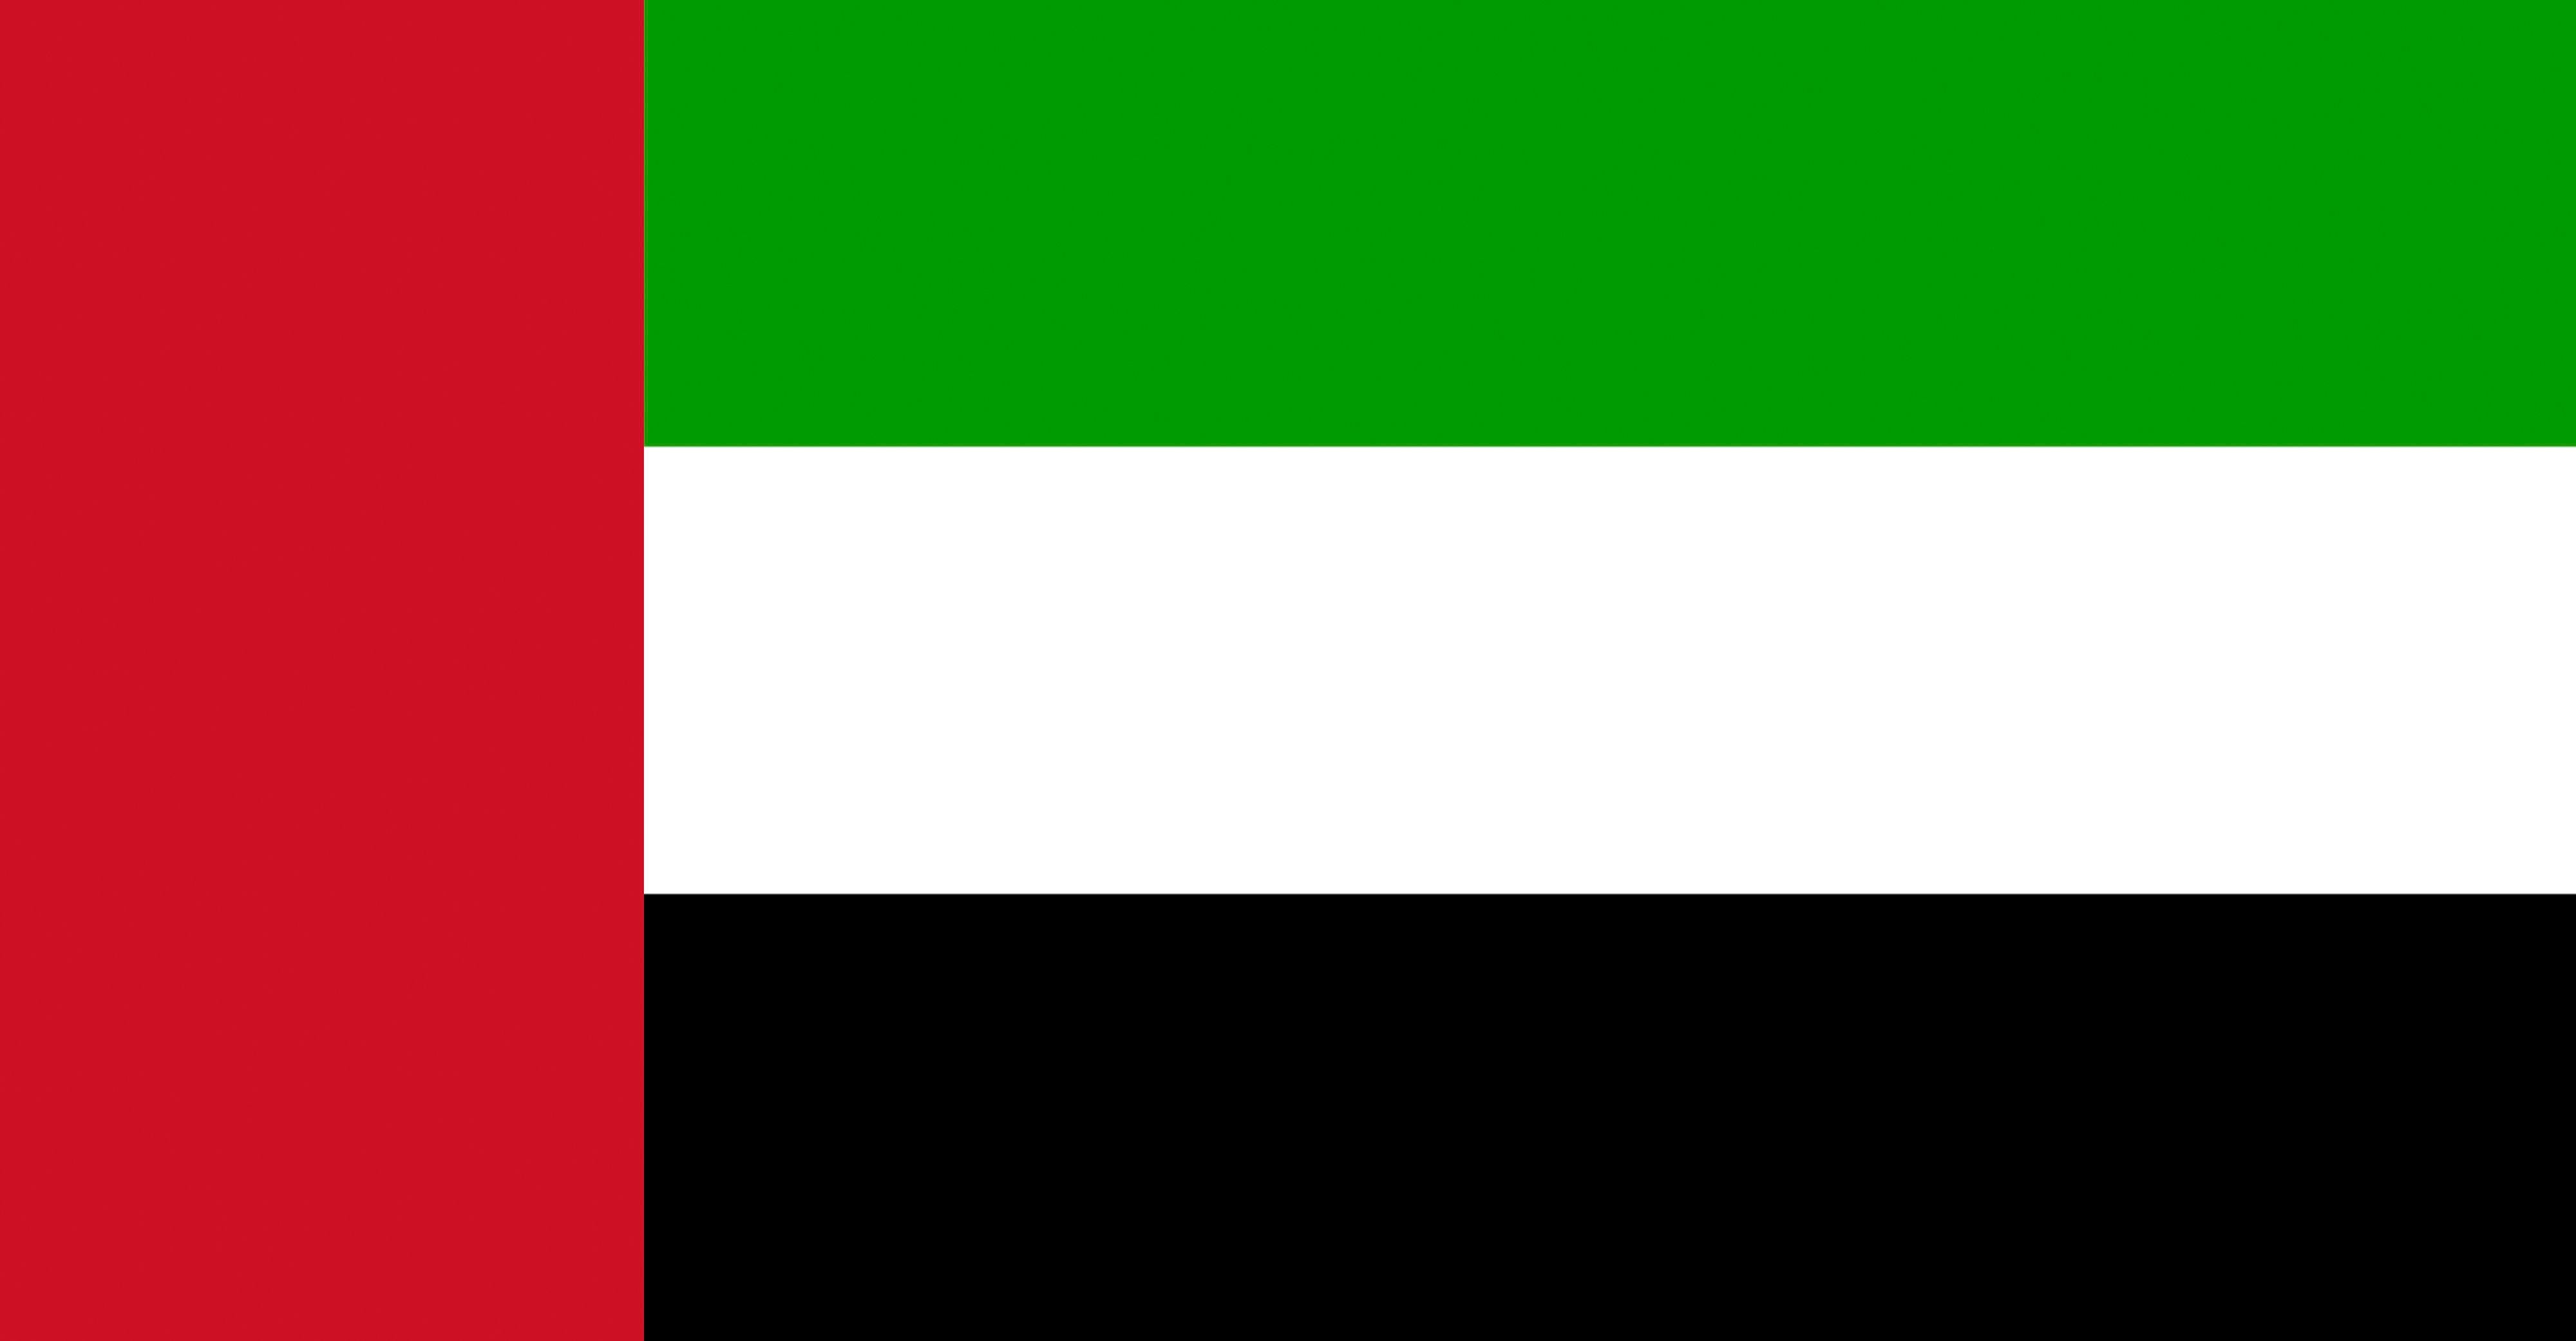 Why are so many Arab flags red, green, black and white?